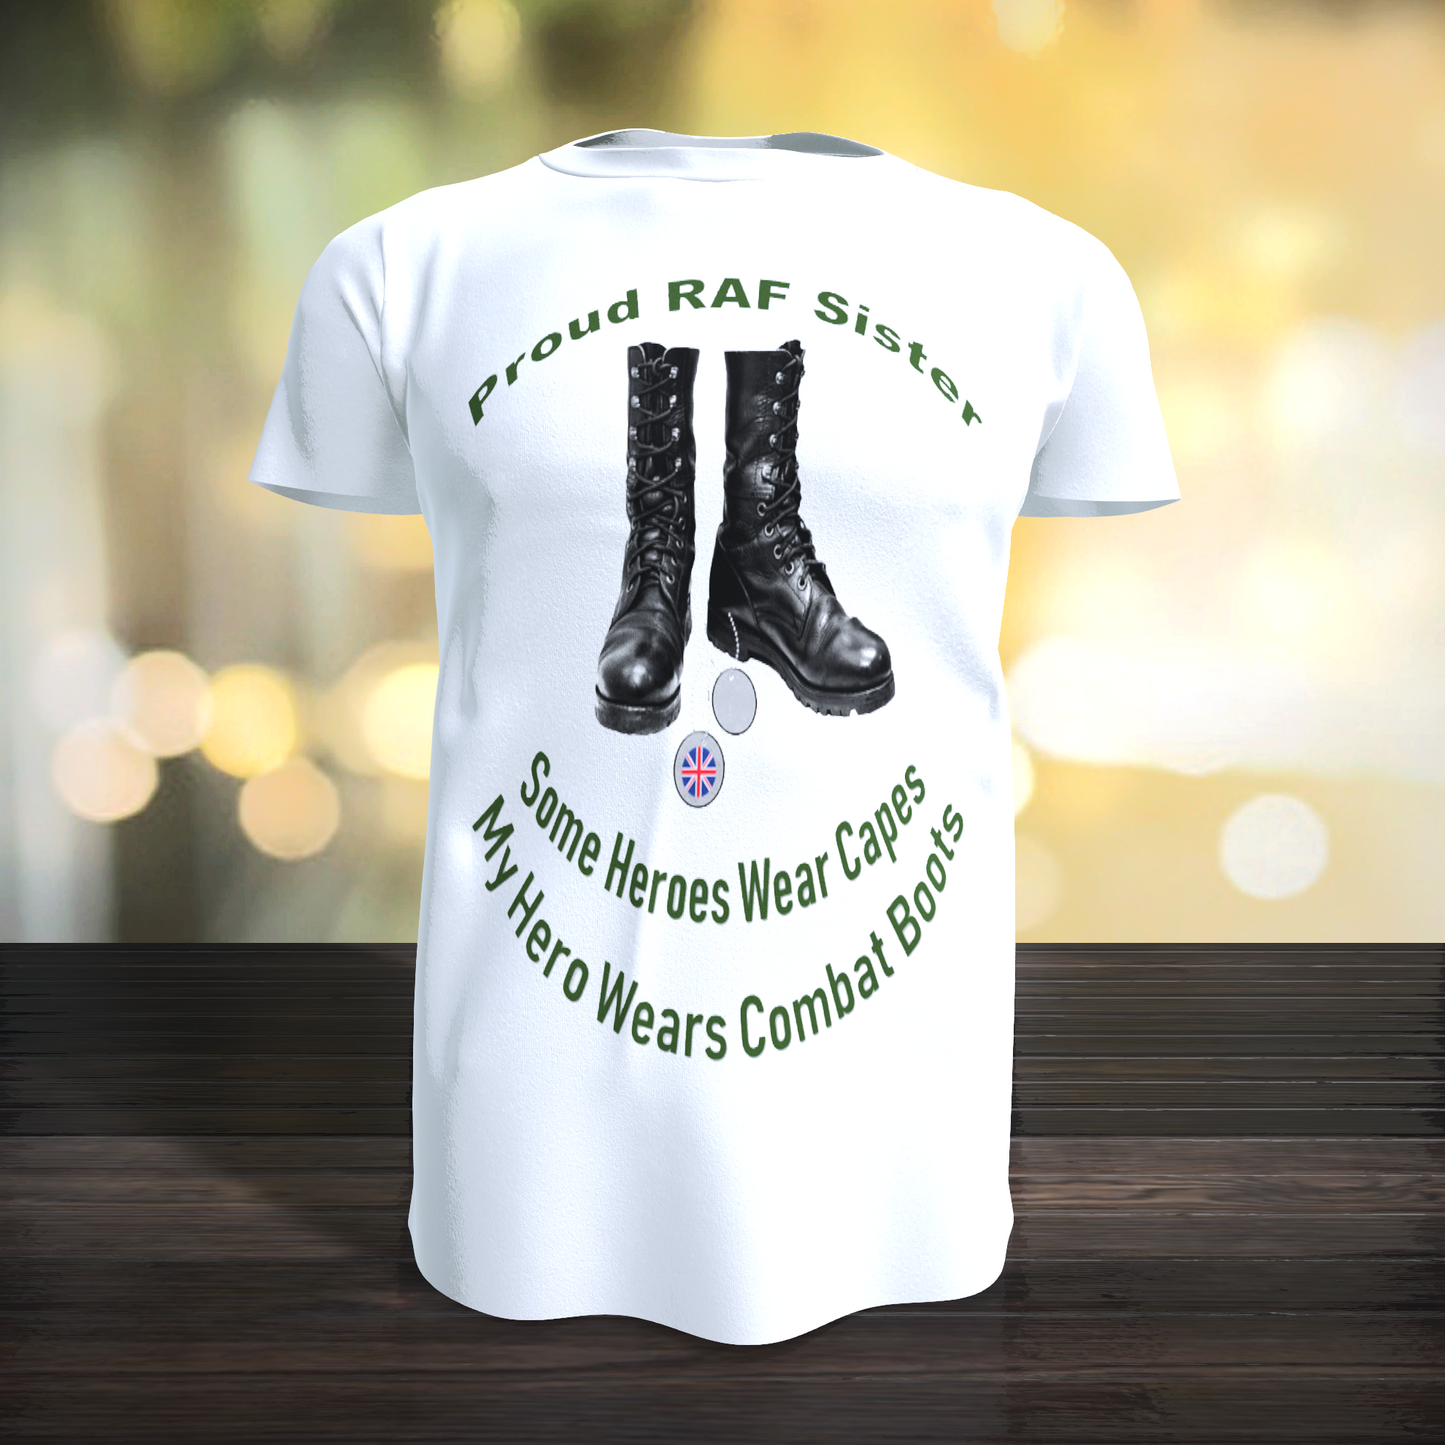 Bear Essentials Clothing Proud RAF Mum or Dad and Sister T-Shirt - Army 1157 kit White / XL / Sister Army 1157 Kit Veterans Owned Business